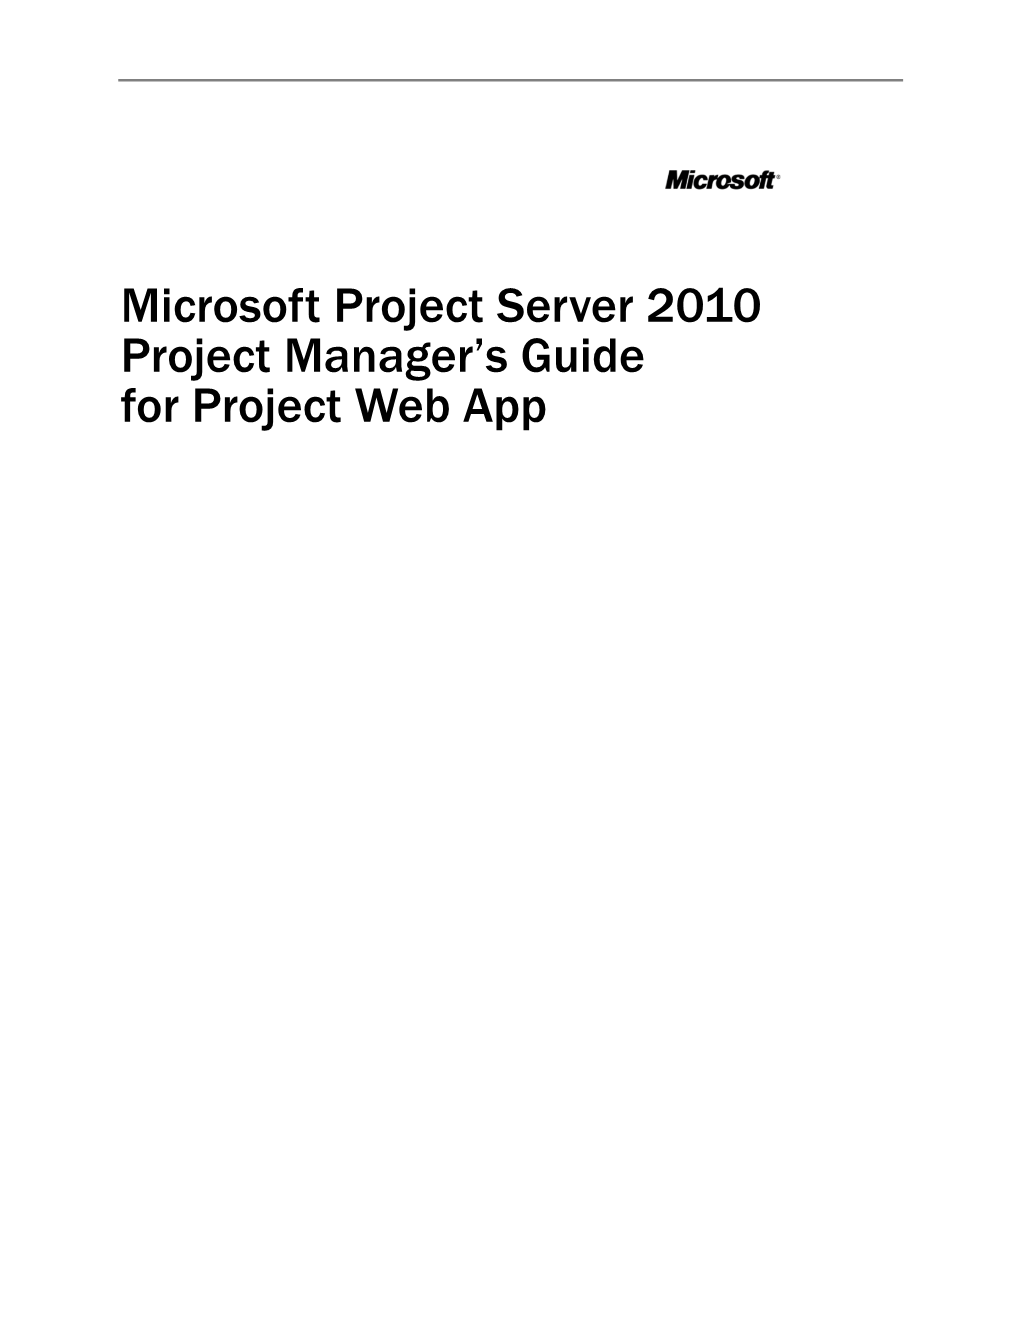 Microsoft Project Server 2010 Project Manager's Guide for Project Web